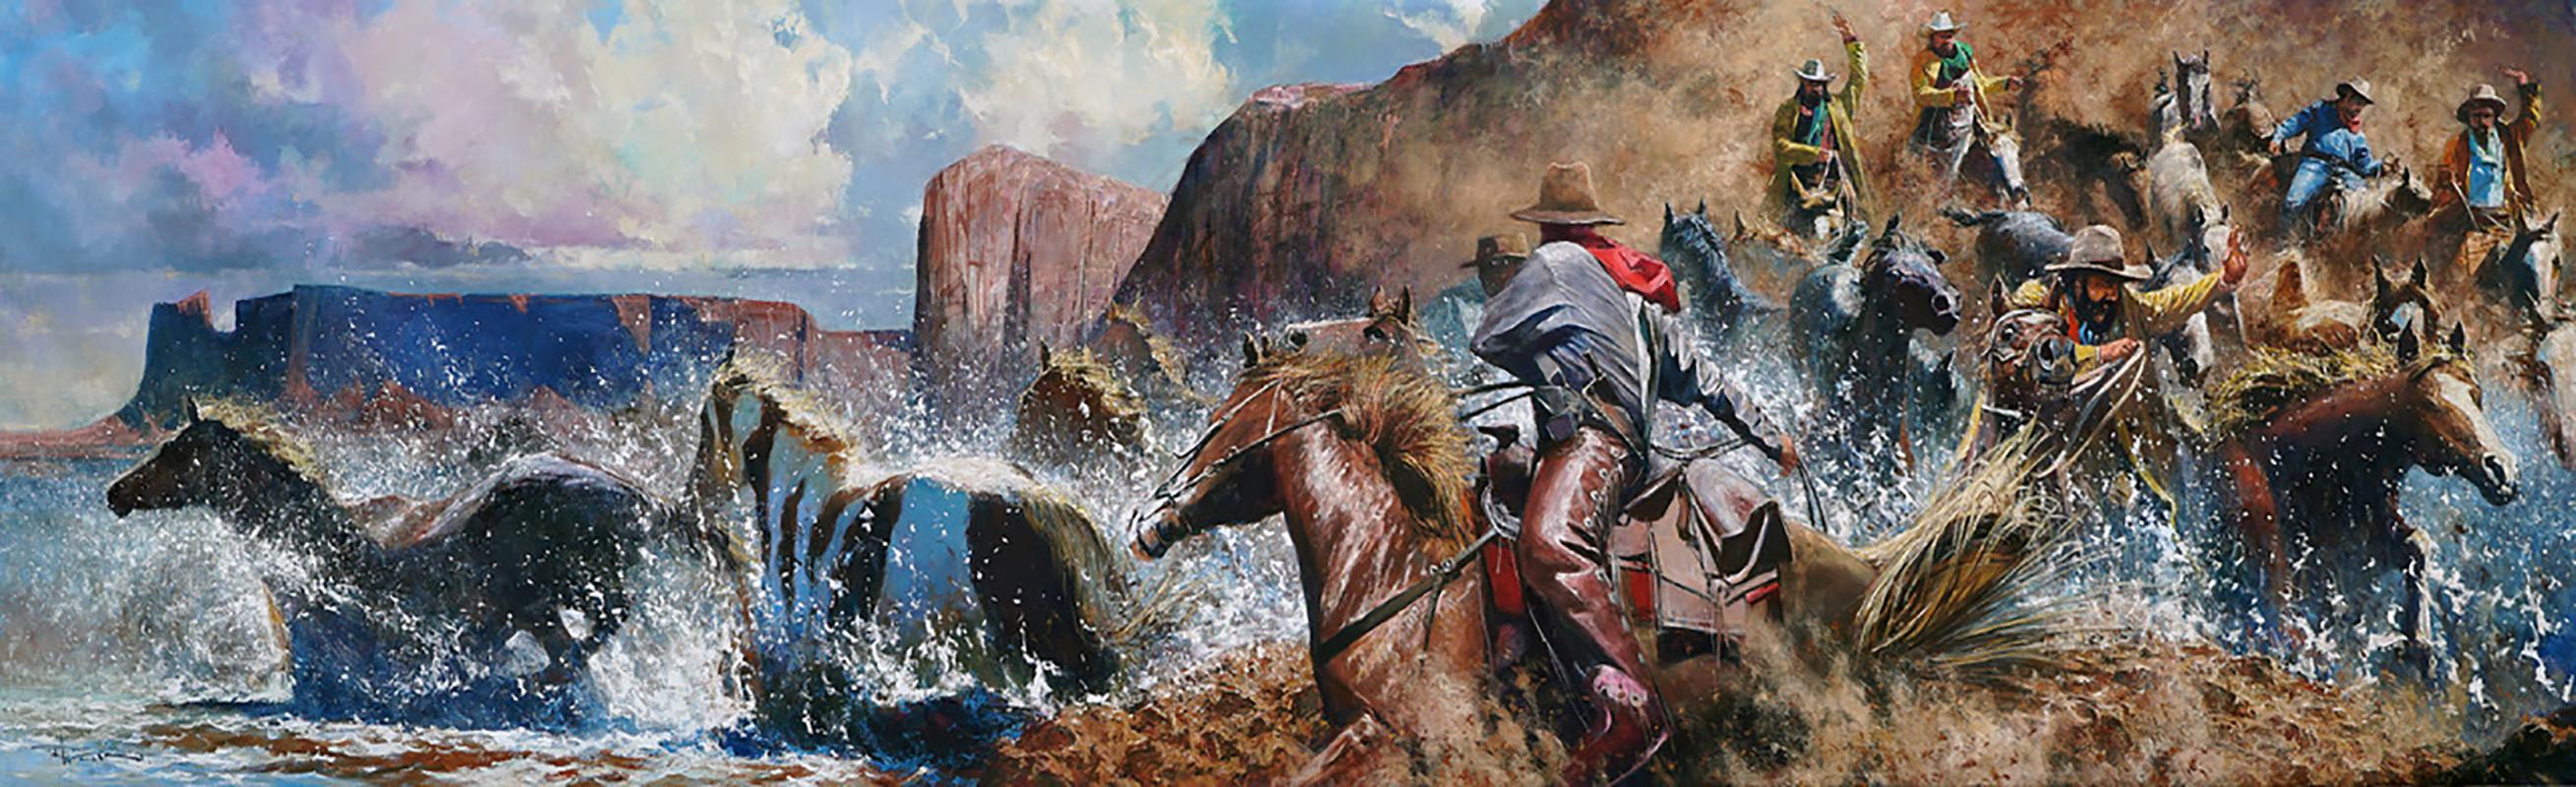 "Moving the Wild Ones" by Robert Hagan is an original oil on canvas and measures 60x216.  
In this large original painting by Robert Hagan, cowboys on horseback run through the canyon mountains kicking up dust and trying to reign in runaway mustangs